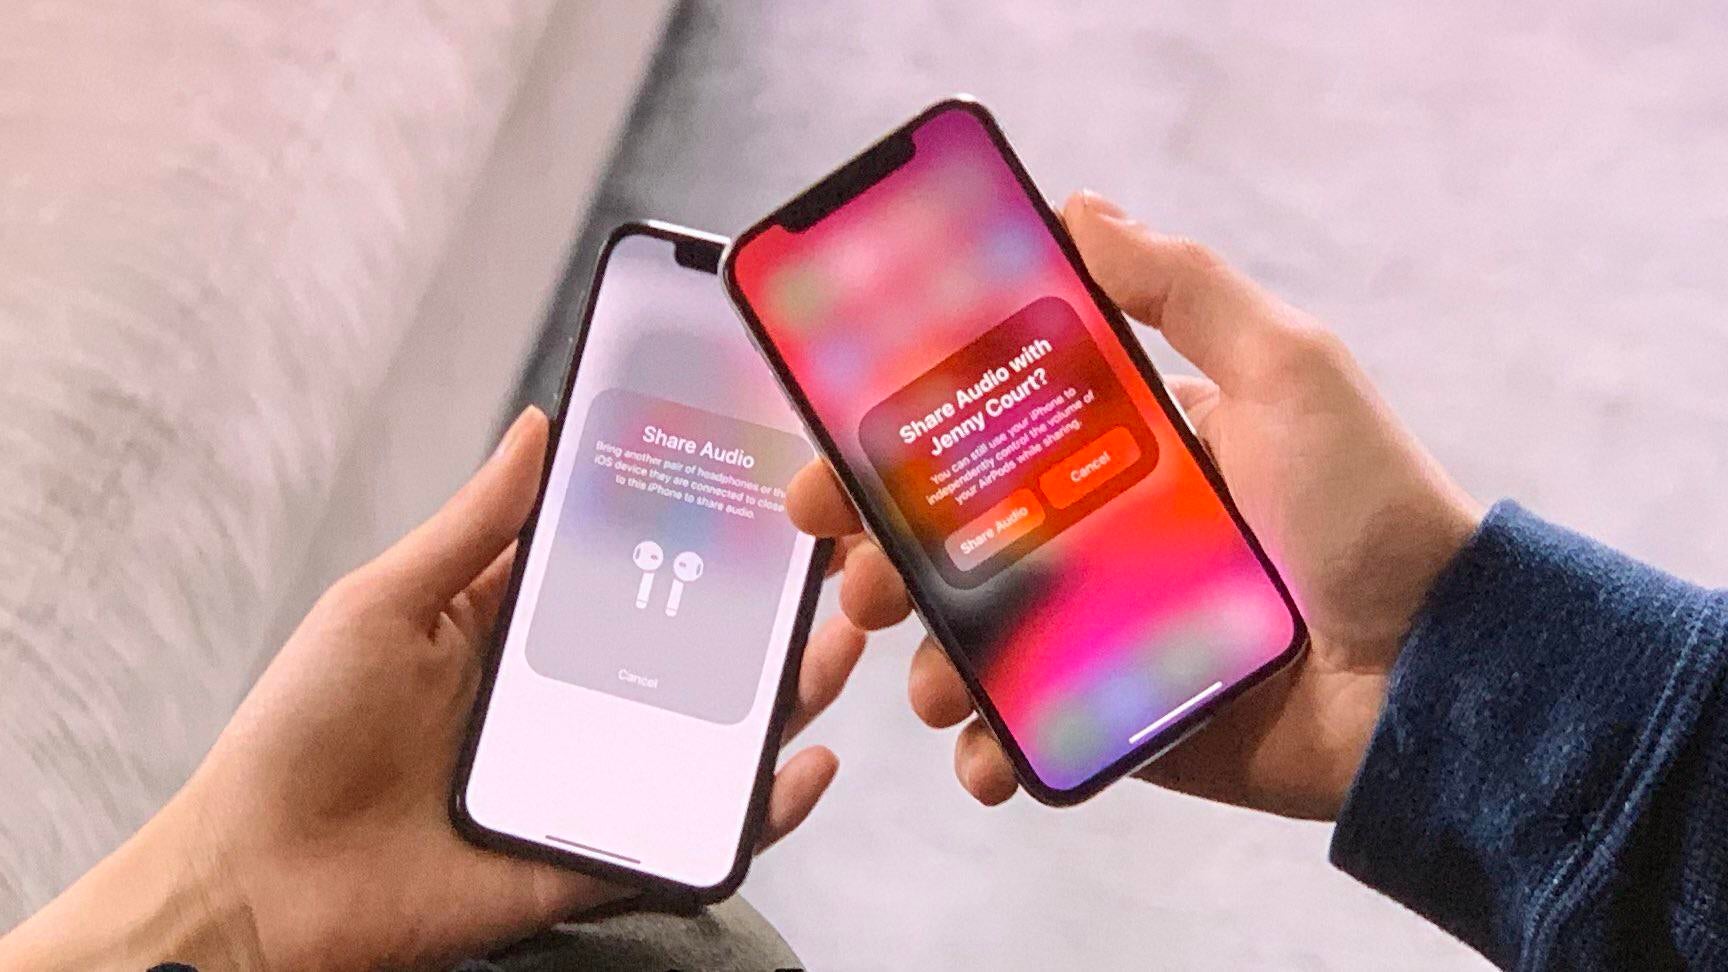 How To Set Up Wireless Audio Sharing In iOS 13